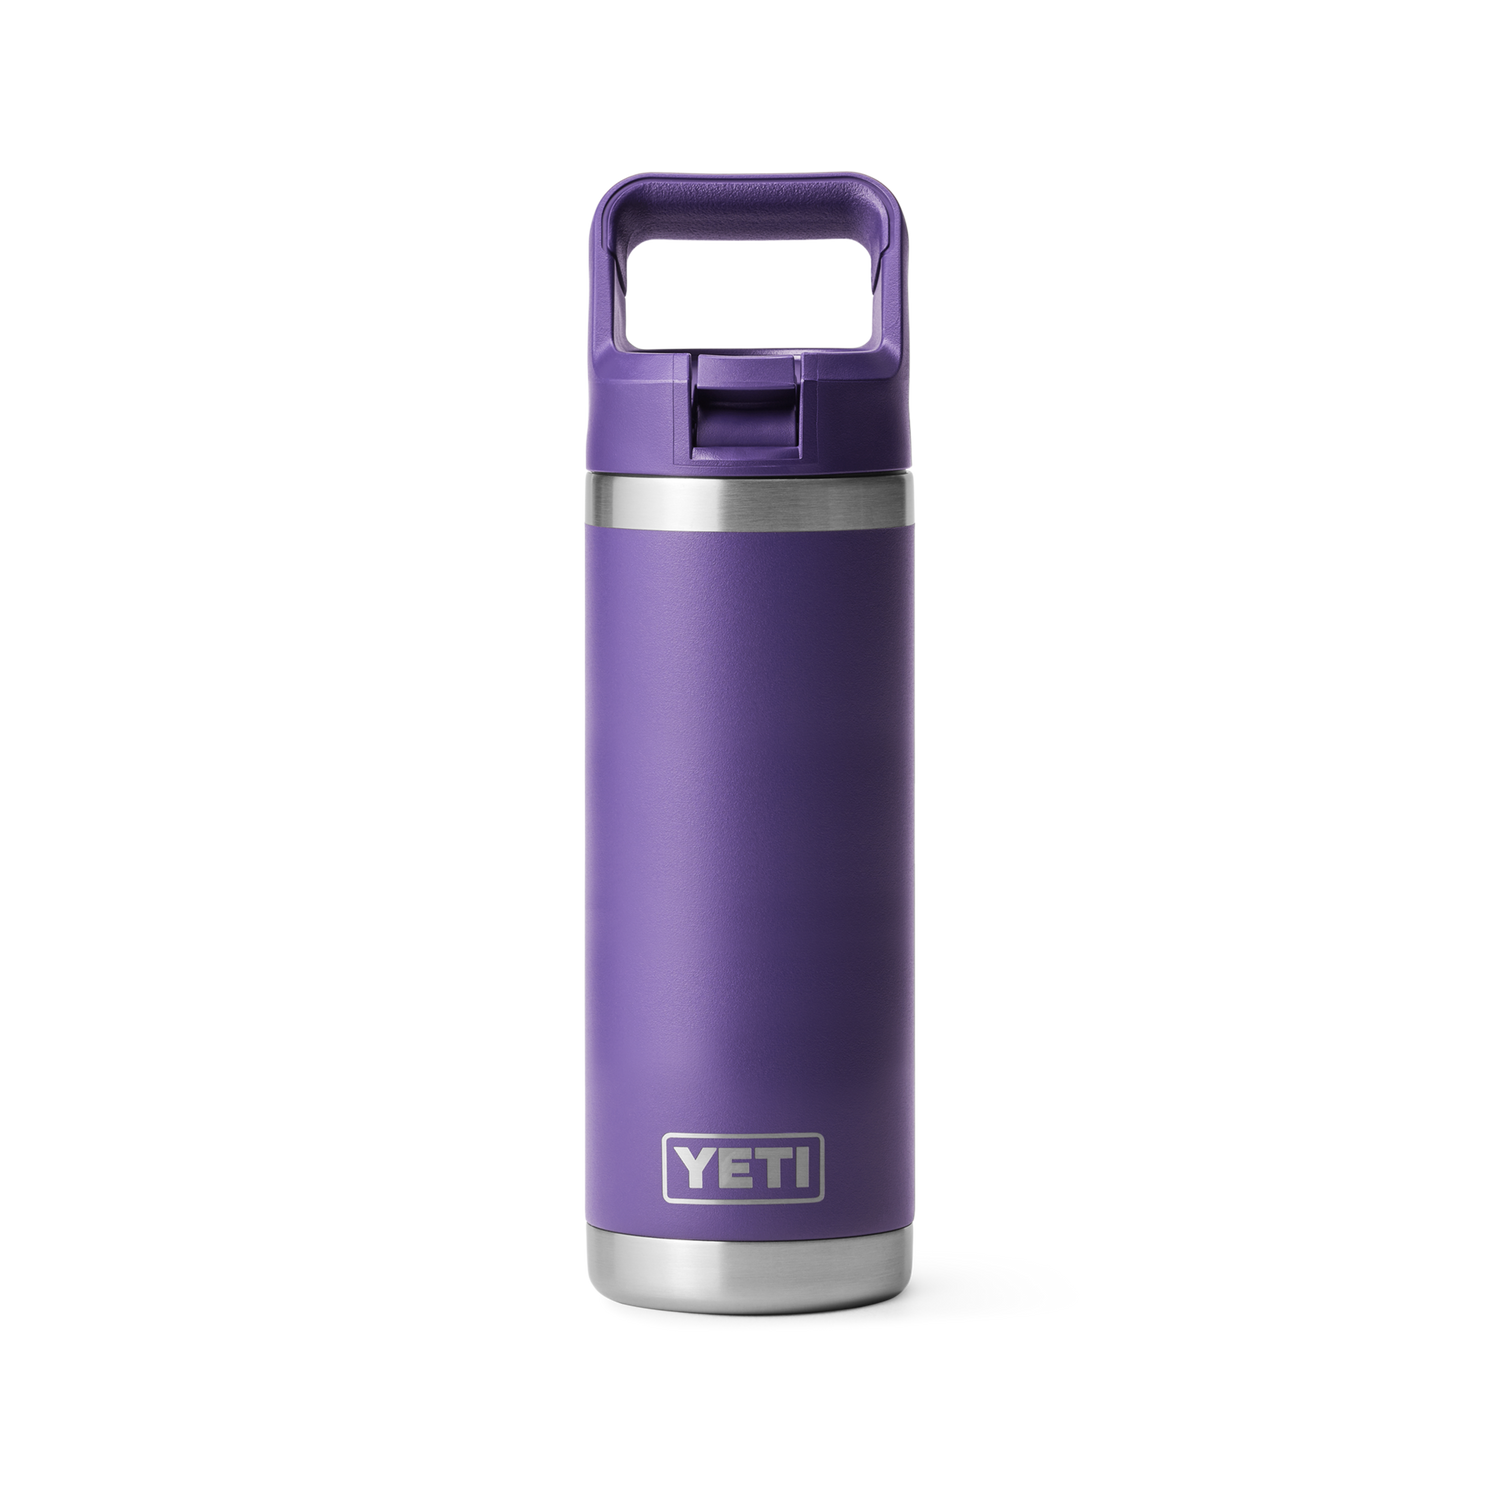 Should I just give up on hope that Yeti will release light purple